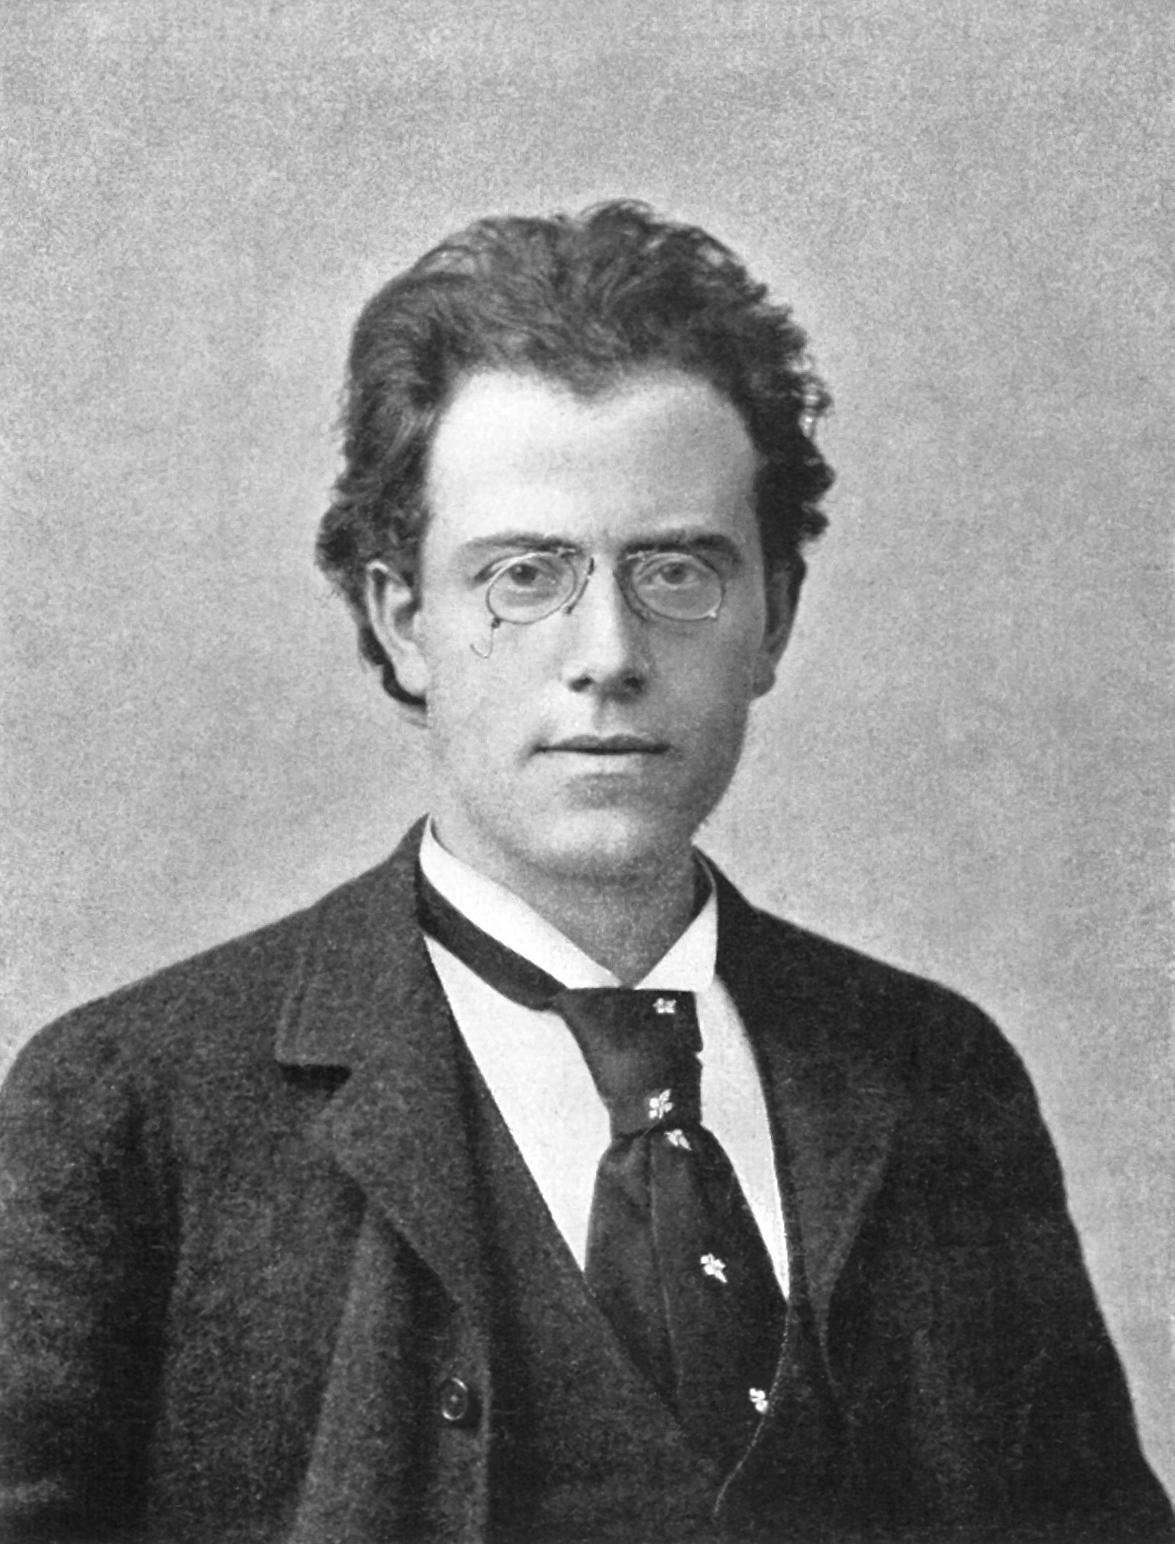 Mahler’s Appointment with Freud